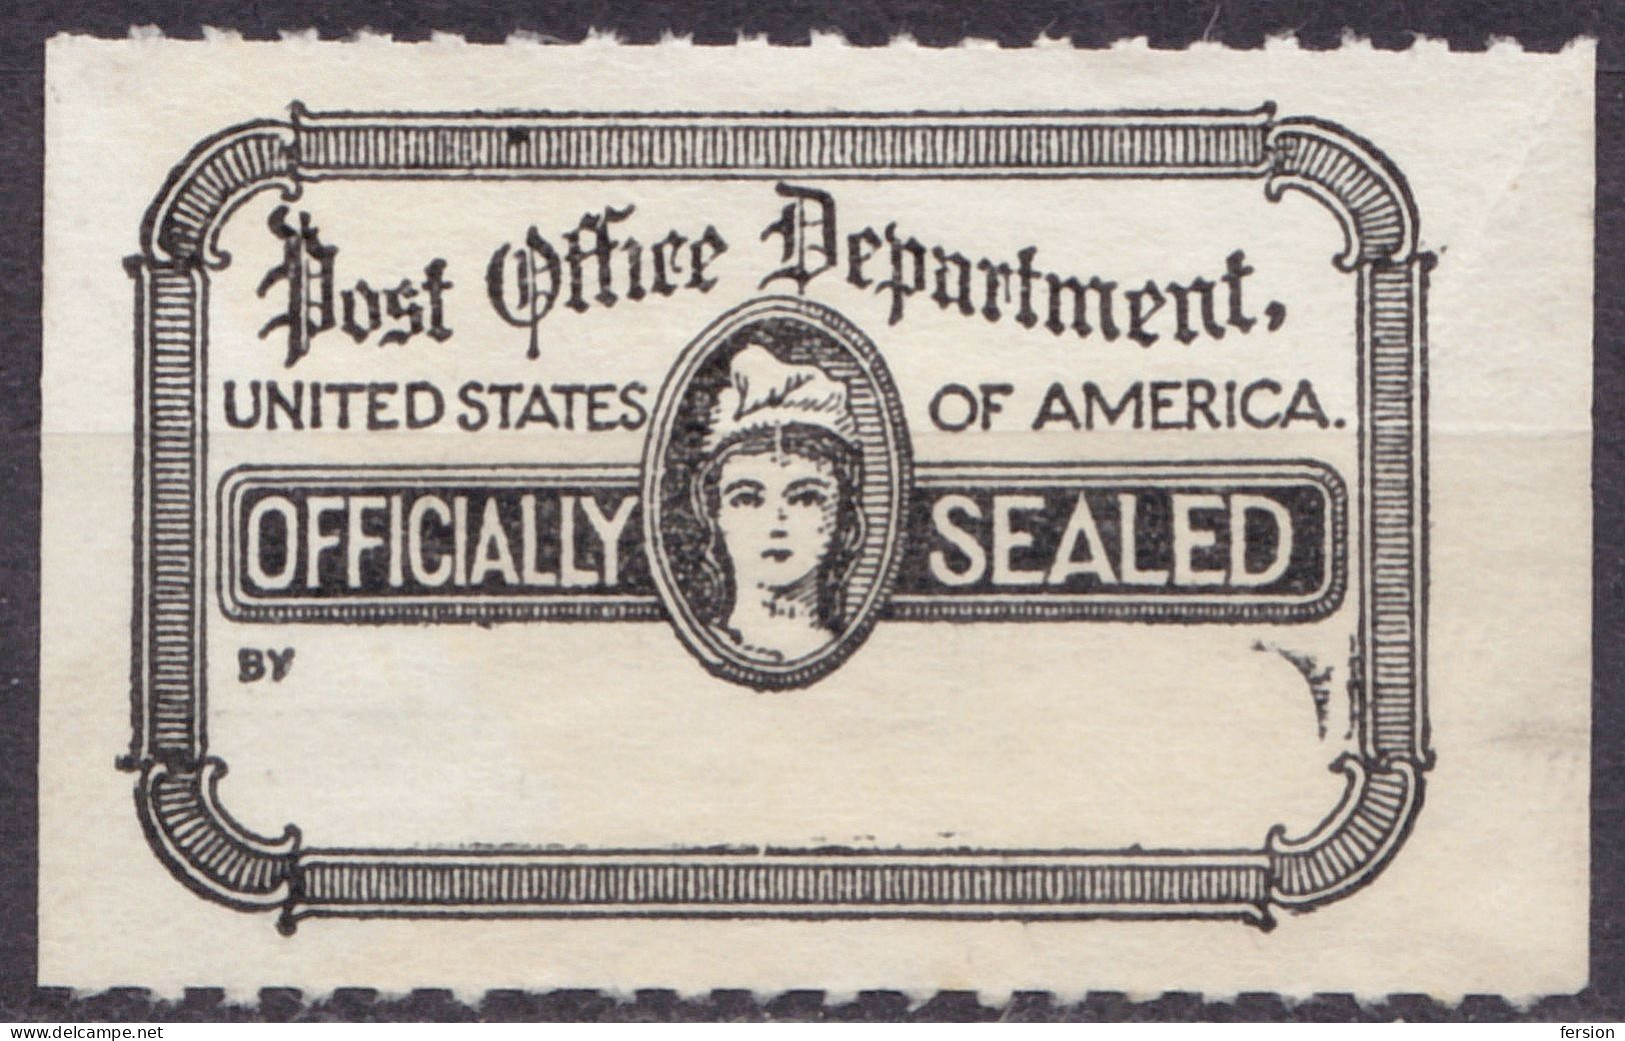 US Post Office Department - Official Seal - CLOSE Vignette Label - USA - Used / Officially Sealed - Poste